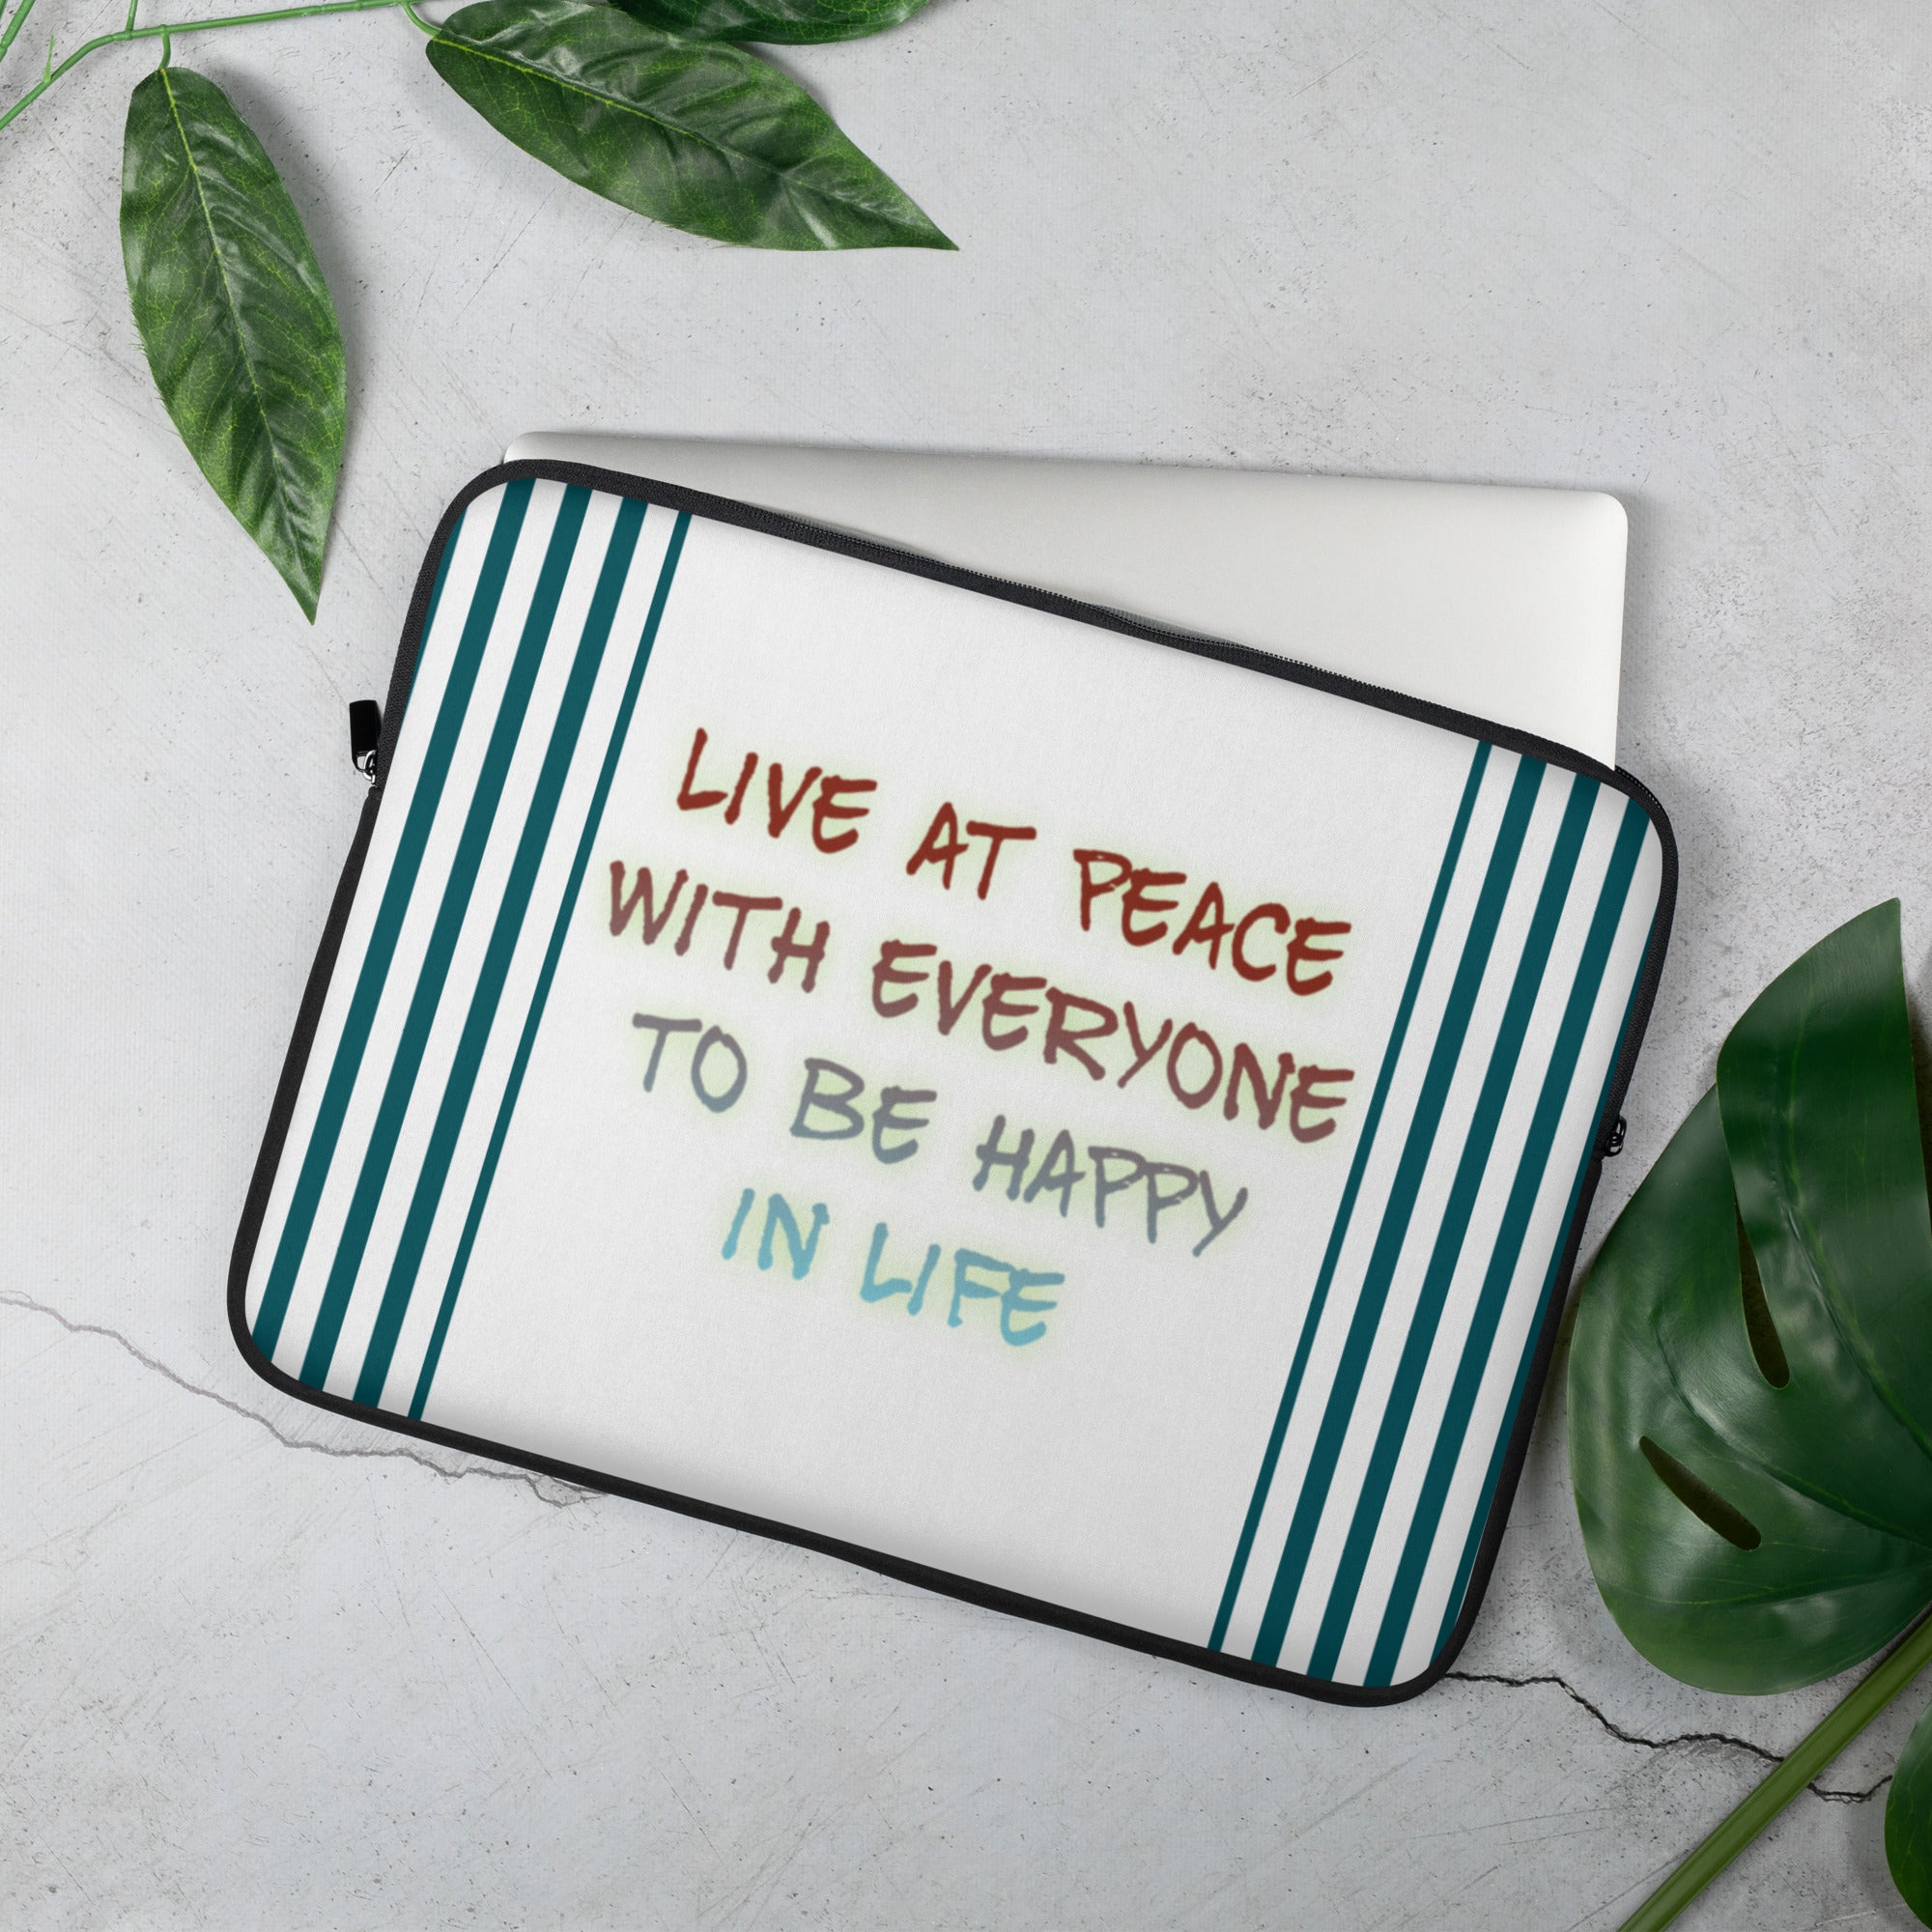 GloWell Designs - Laptop Sleeve - Motivational Quote - Live At Peace With Everyone - GloWell Designs